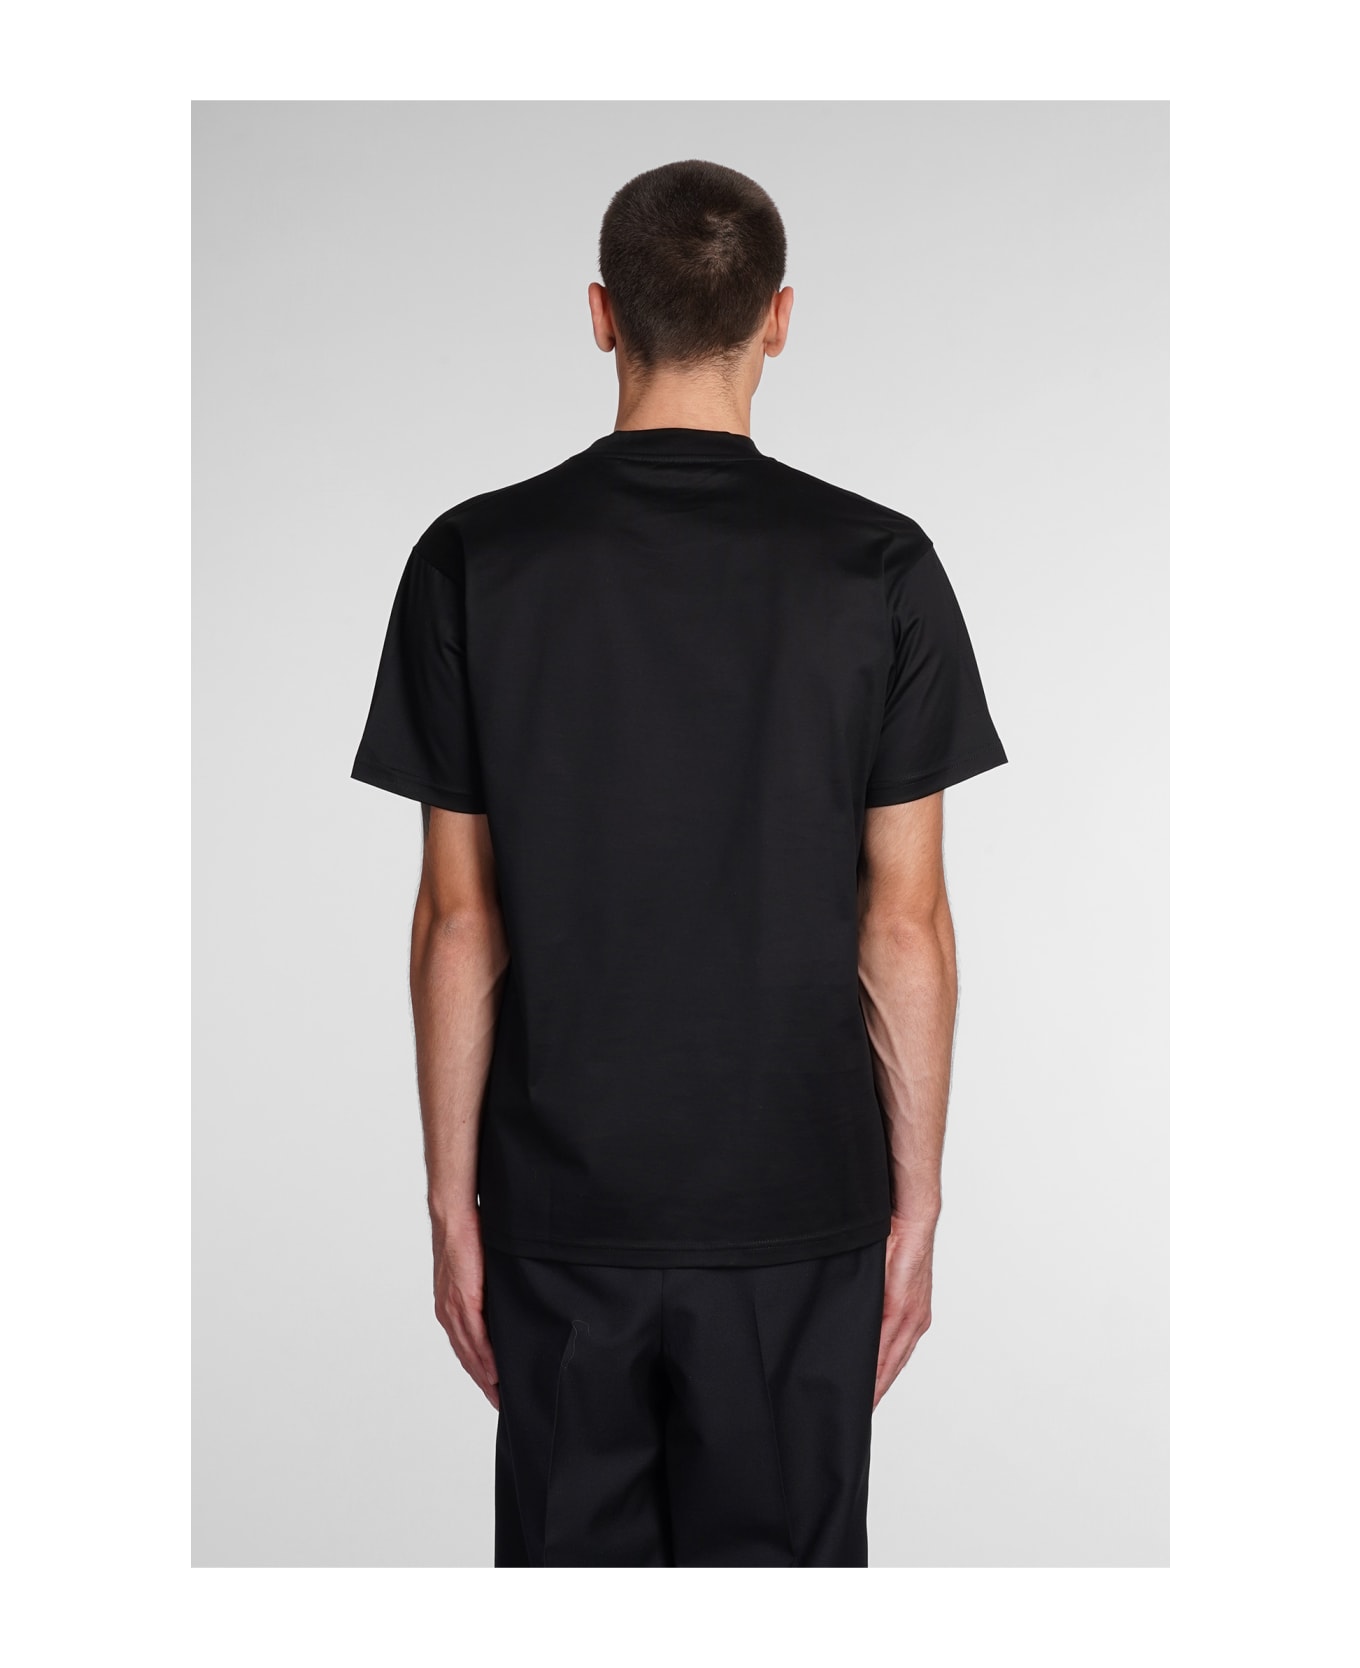 Low Brand B150 Embroidery T-shirt In Black Cotton - black シャツ